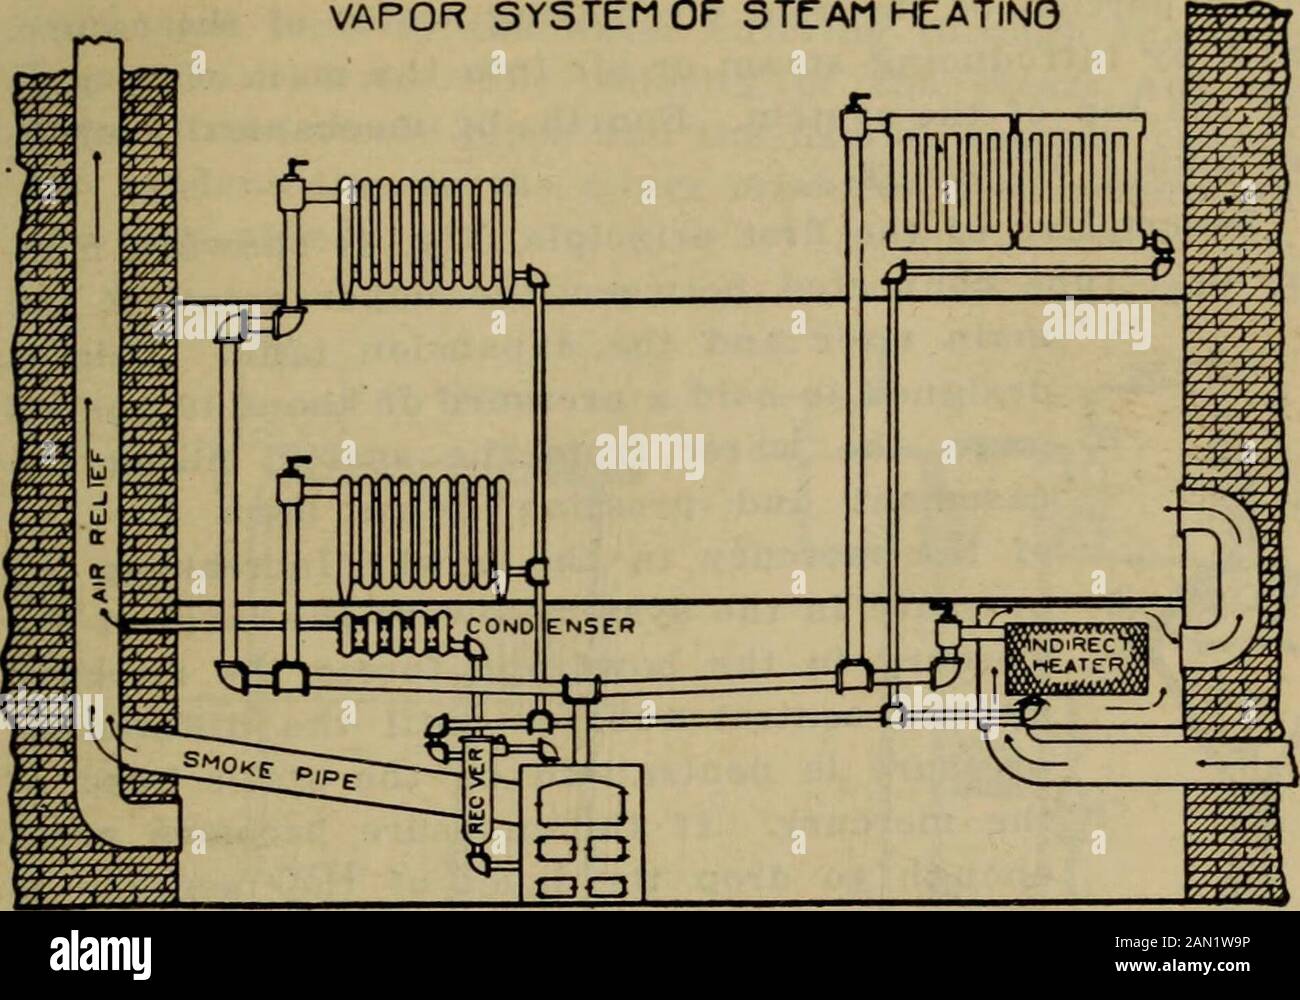 Handbook for heating and ventilating engineers . Fig. 42. HOT WATER AND STEAM HEATING 95 VAPOR SYSTEM OF STEAM HEATINO. Fig. 4; 68. Accelerated Hot Water Heating Systems:—Improve-ments have been devised for hot water heating whereby thecirculation of the water is increased above that obtained bythe open tank system. By increasing the velocity of thewater, pipe sizes may be reduced, resulting in an economyin the cost of pipe and fittings. In addition to this, wherethe temperature of the water is carried above that due toatmospheric pressure, the radiation may theoretically bereduced below that Stock Photo